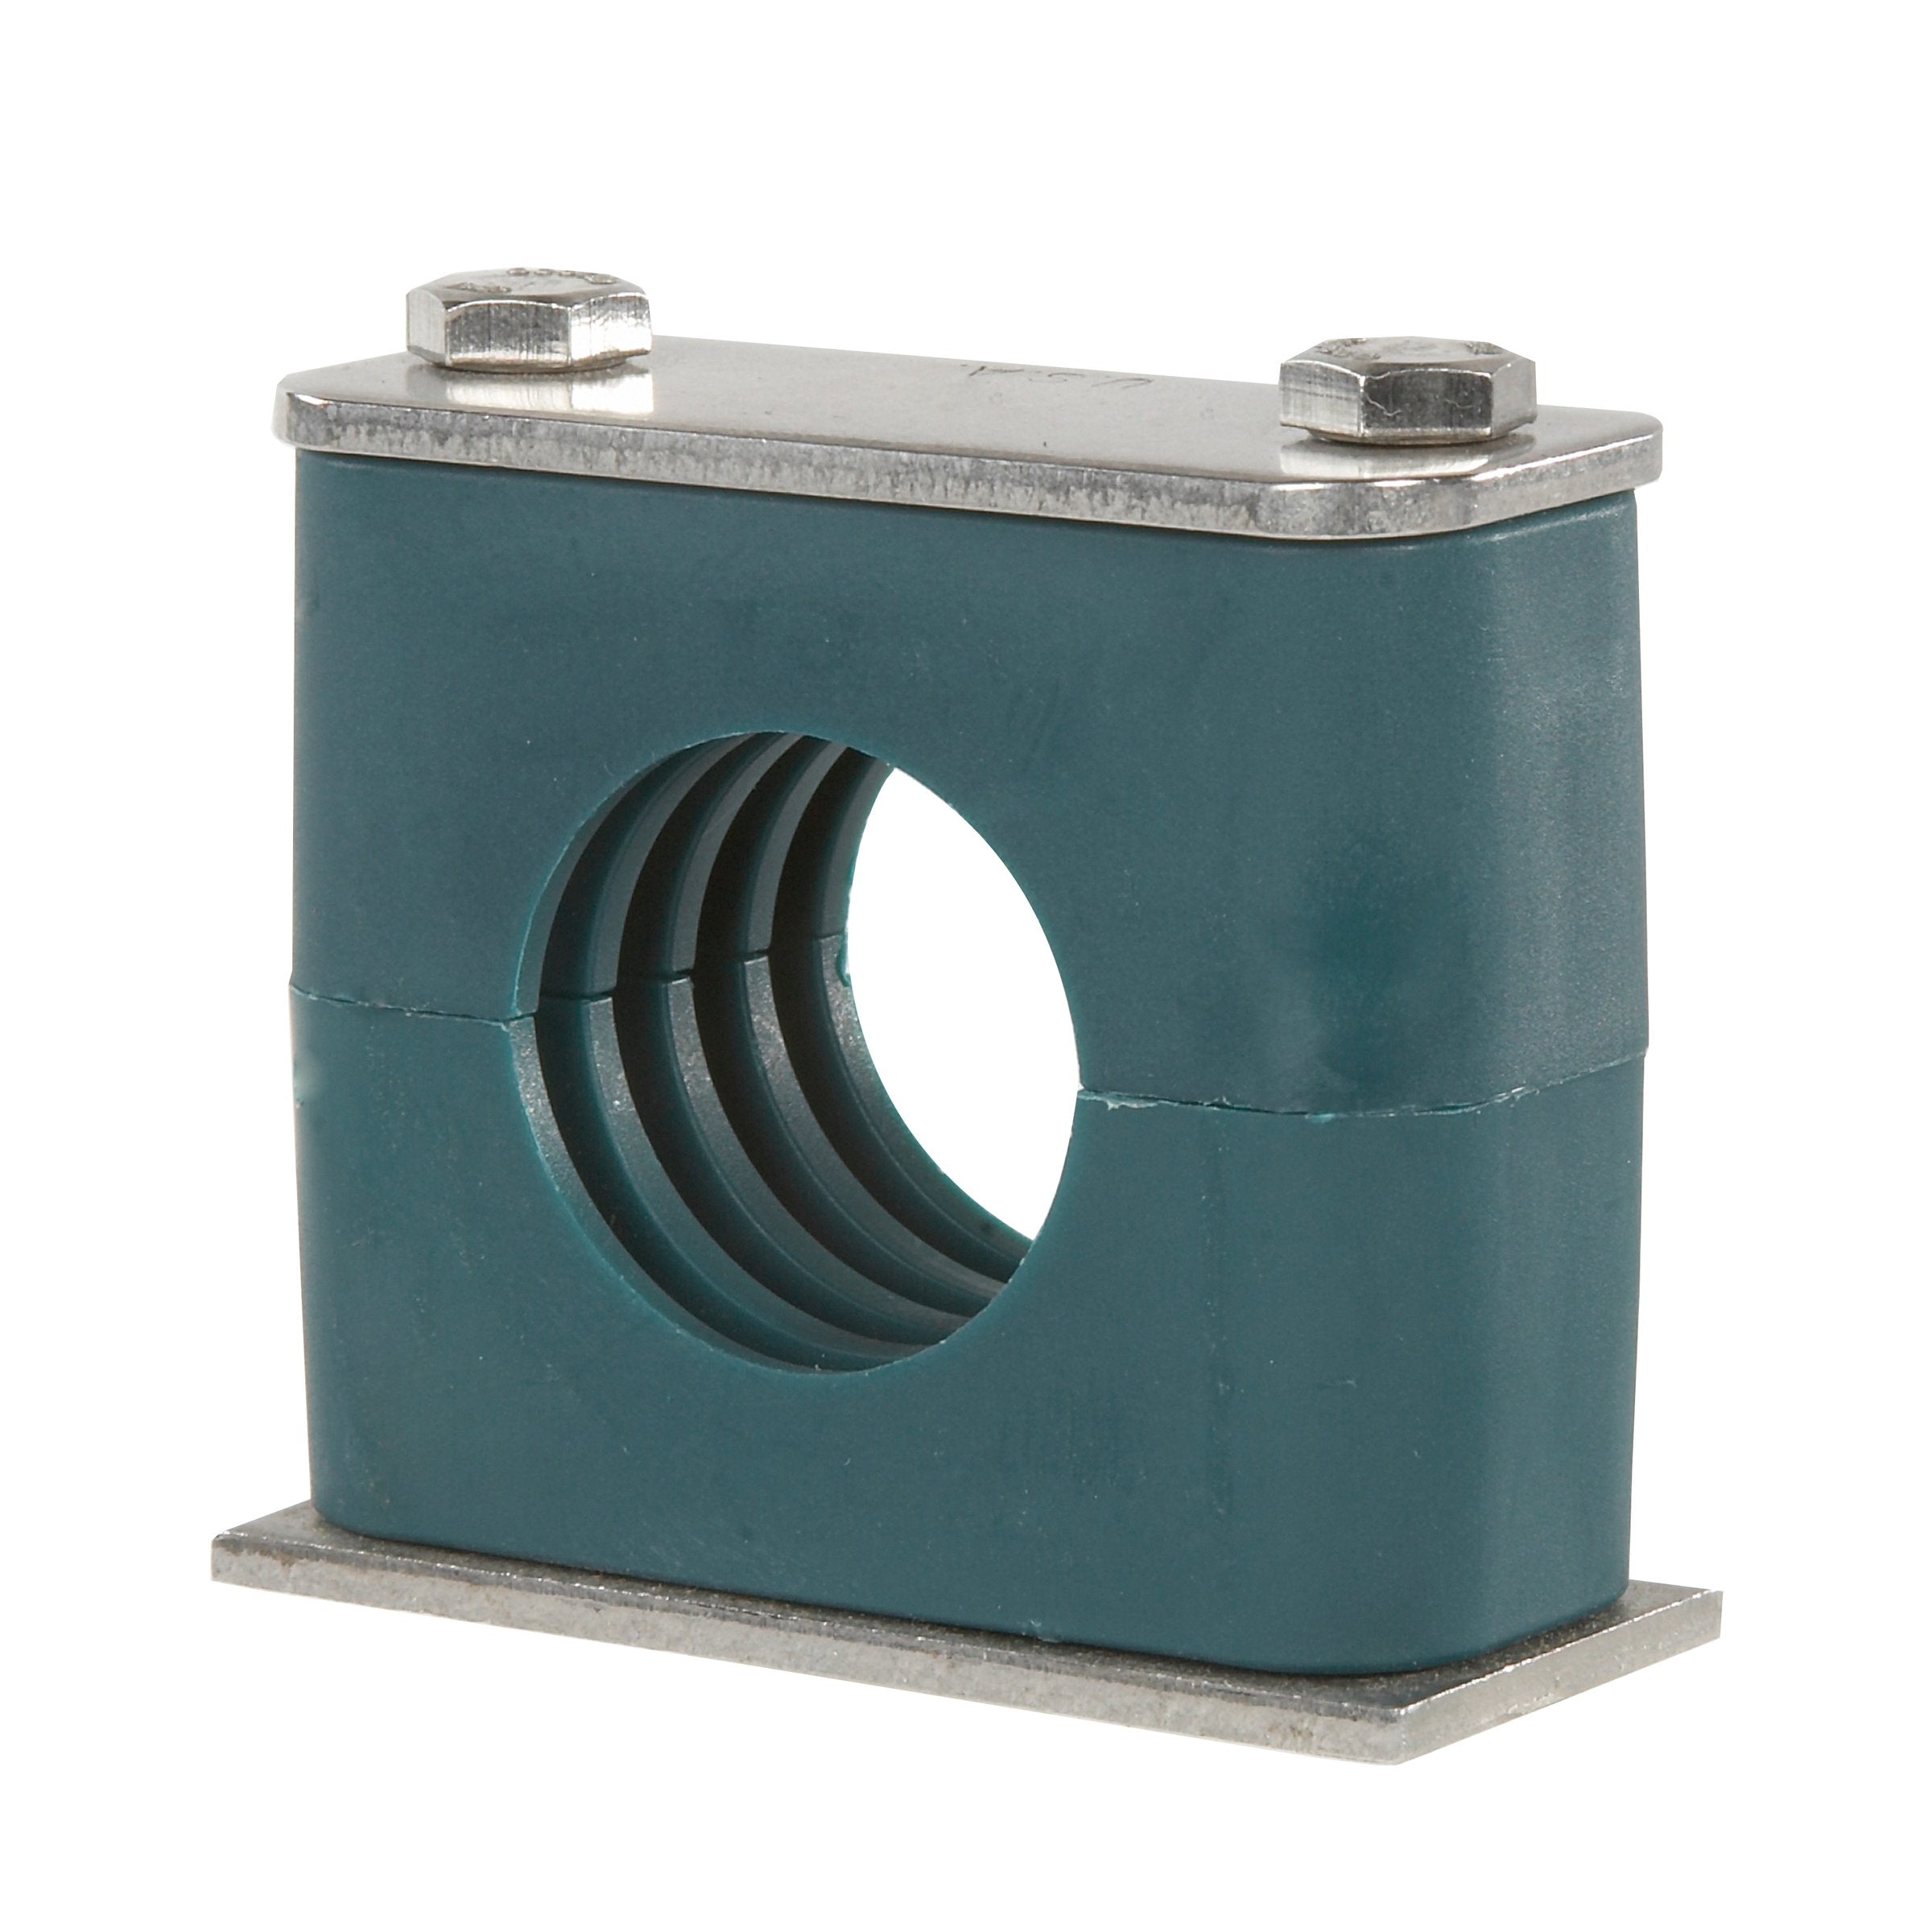 SP-325.4-PP-DP-AS-U-W5 : Stauff Clamp, Single Weld Plate, 1 inch (25.4mm) OD, for 1" Tube, Green PP Insert, Profiled Interior, 316SS